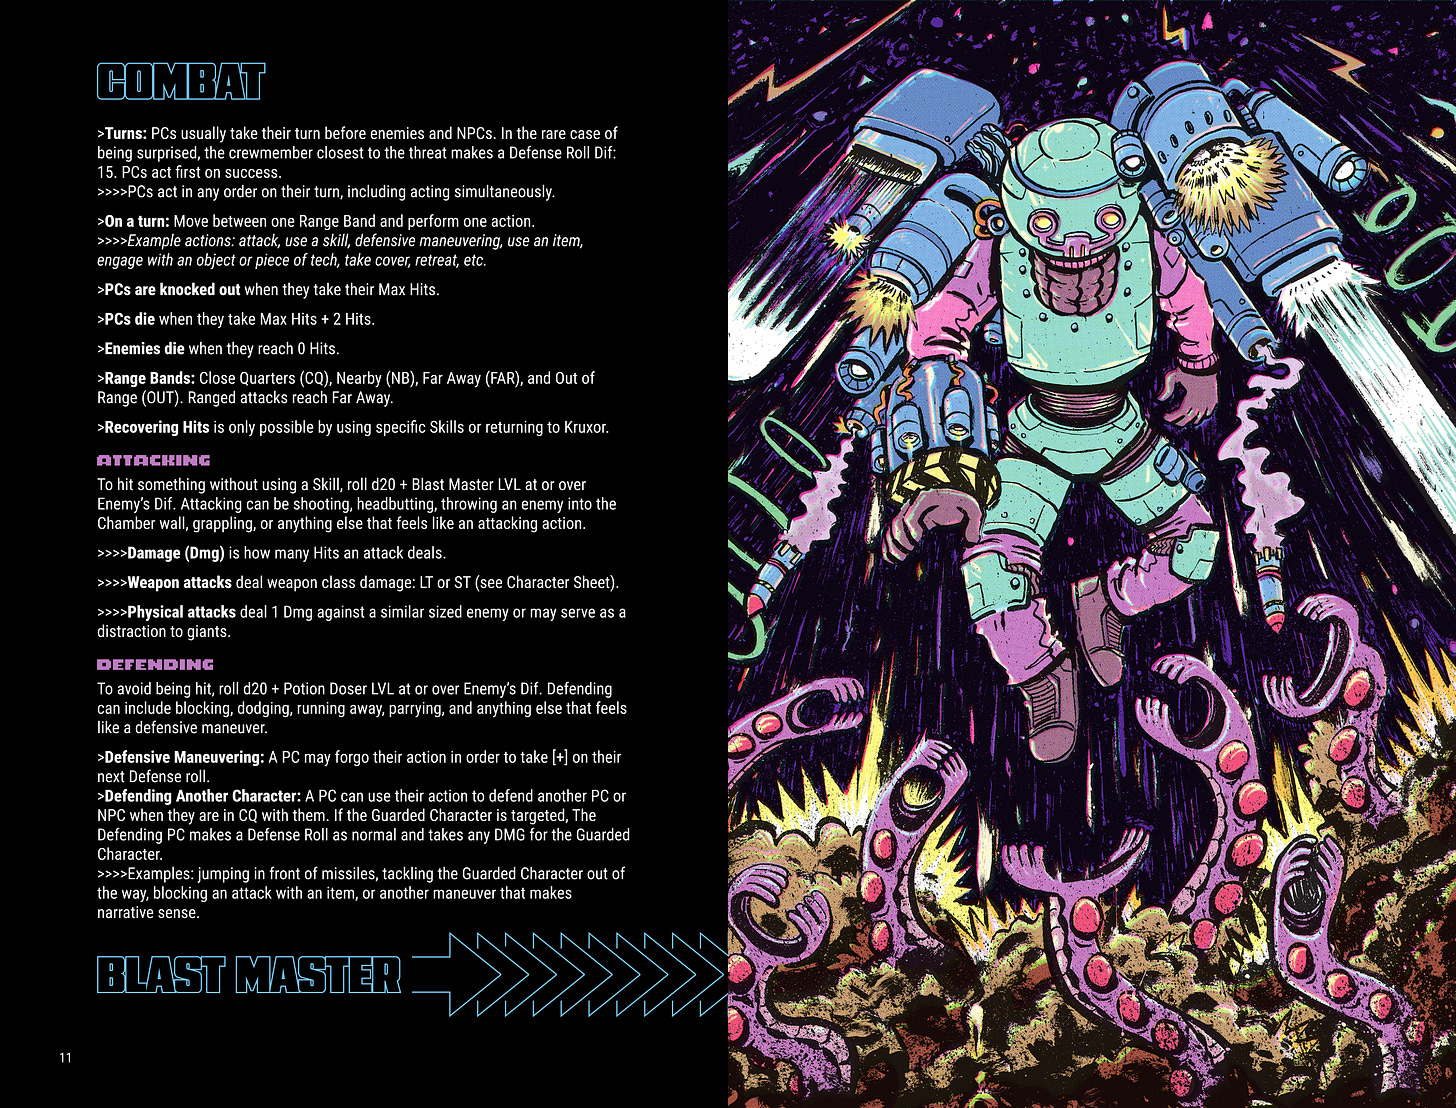 Combat spread. Rules on one side, and a psychedelic space art character portrait fo the Blast Master fighting alien eels.